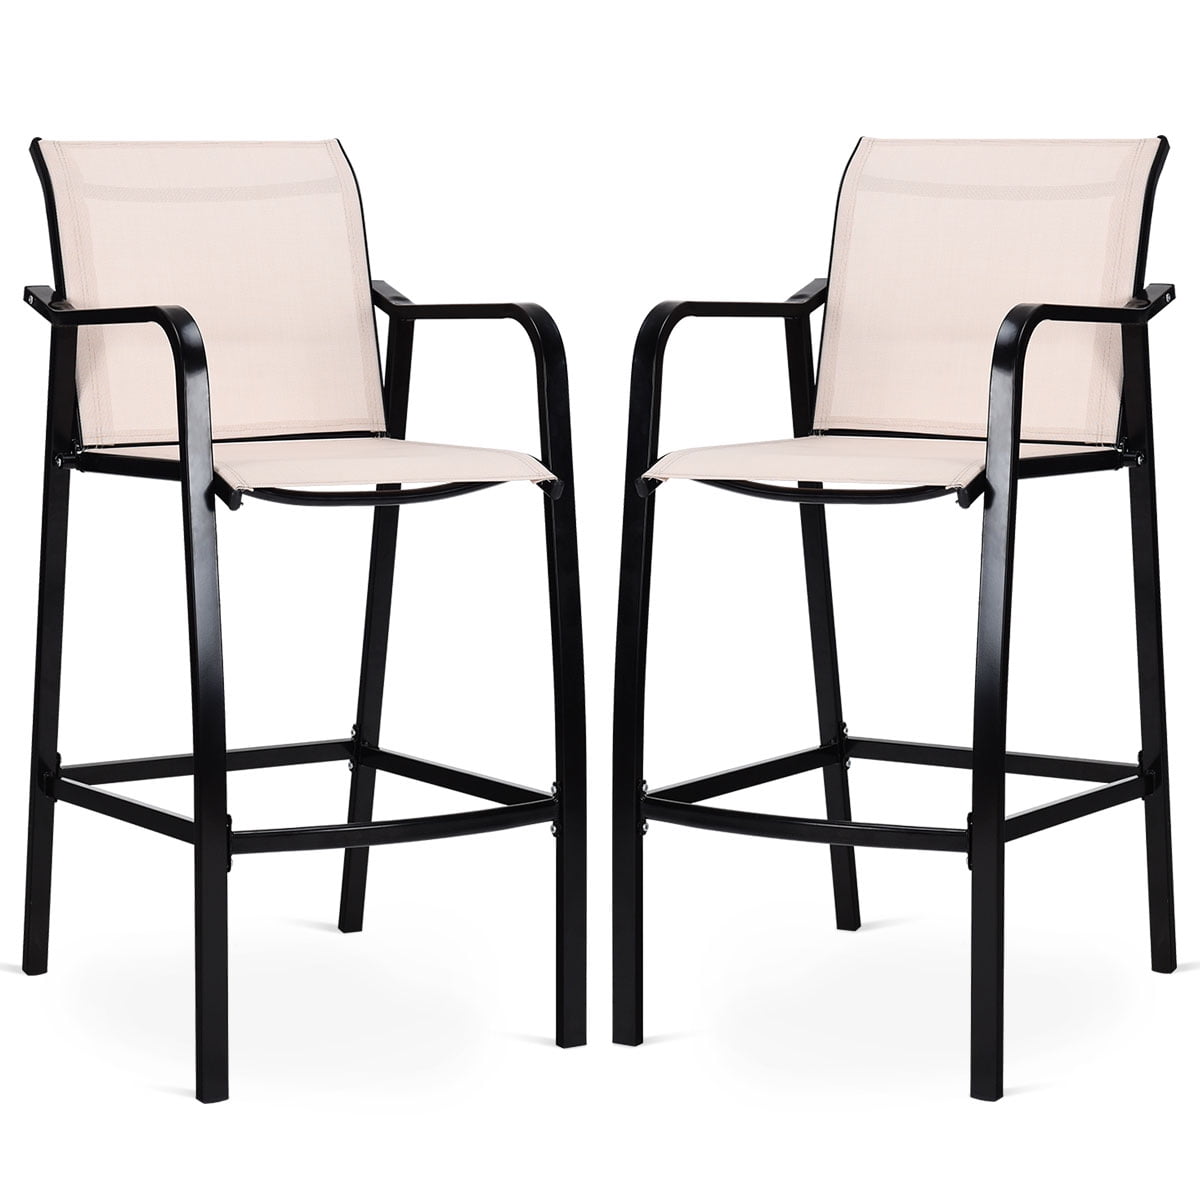 Costway 2 PCS Counter Height Stool Patio Chair Steel Frame Leisure Dining Bar Chair